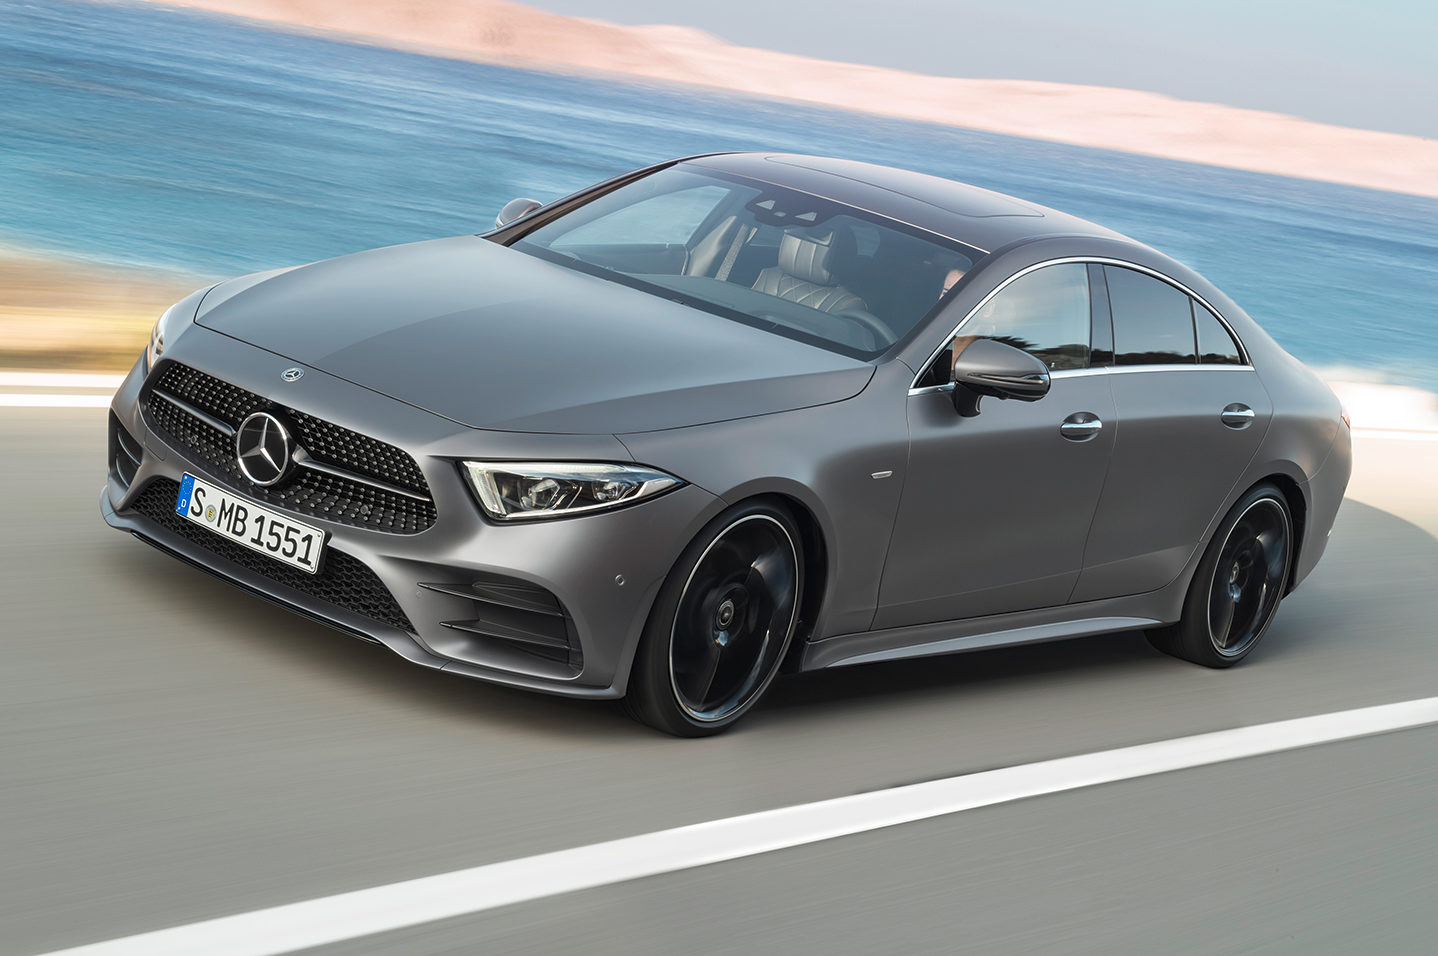 2019 Mercedes-Benz CLS 450, CLS 53 Review: Mercedes Maintains the Magic